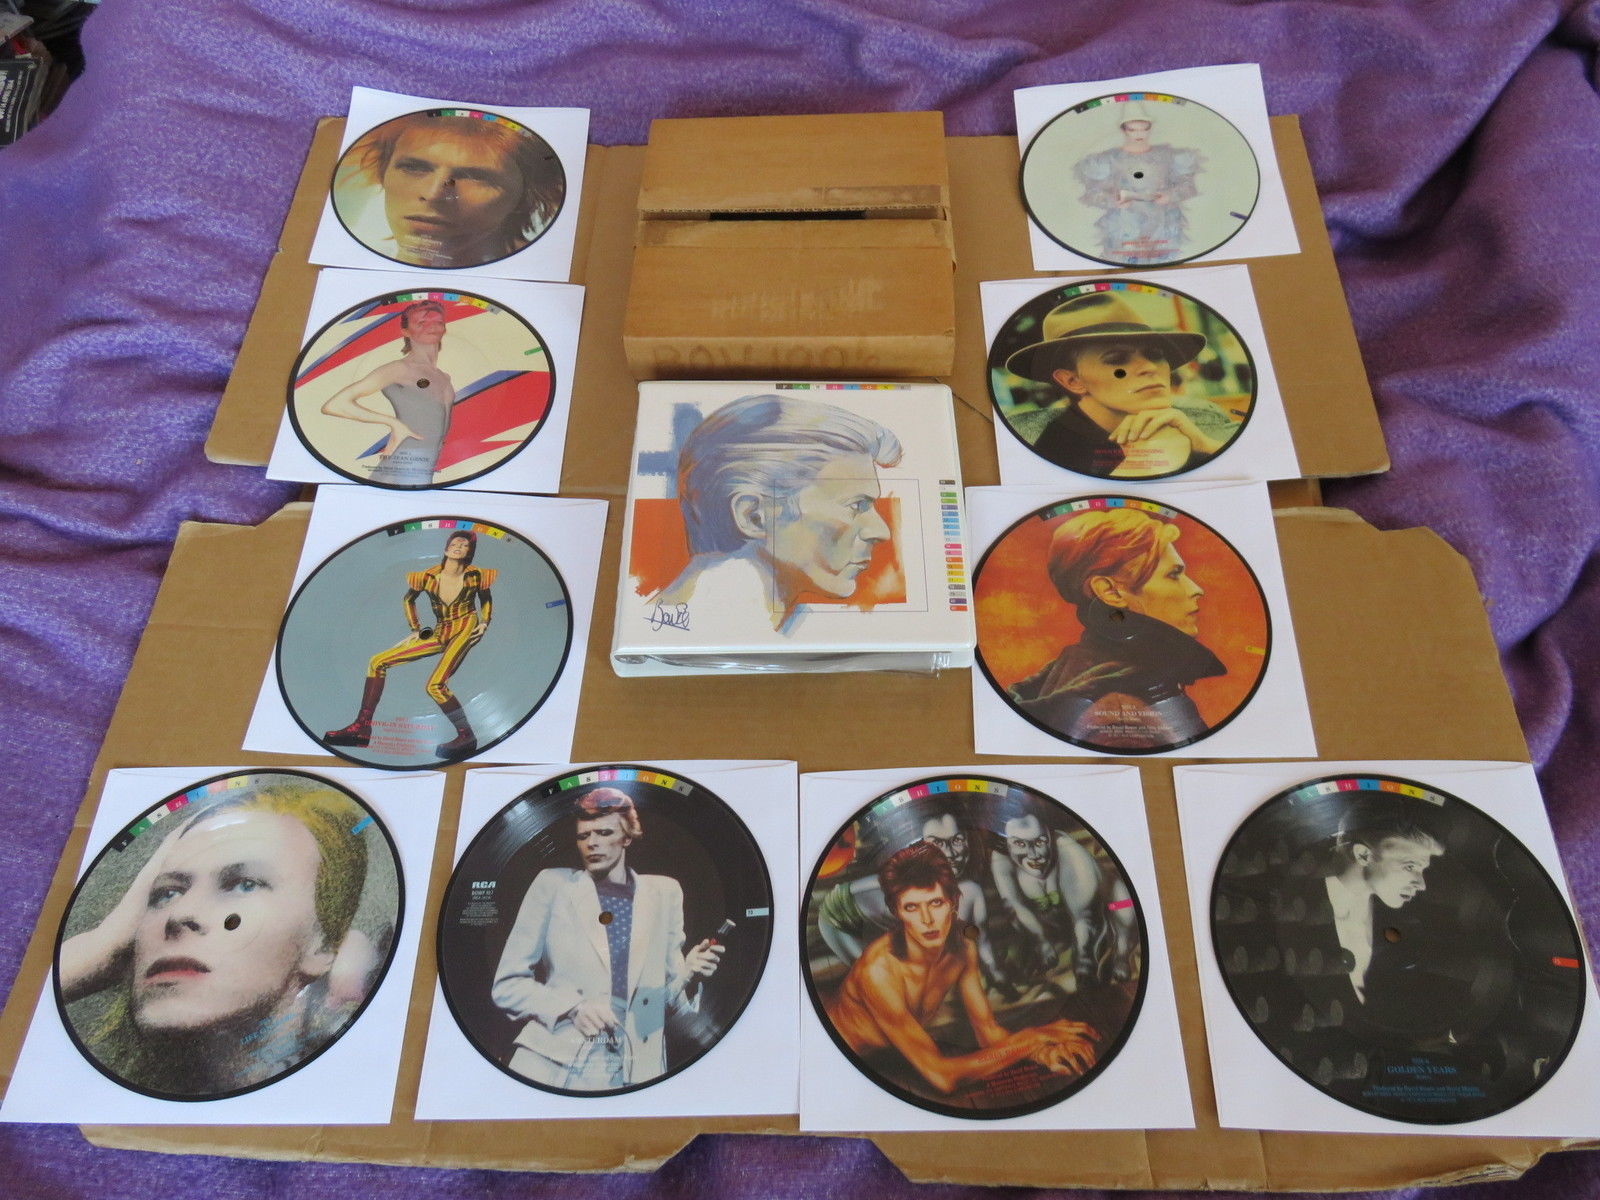 DAVID BOWIE Fashions 10x 7" UK ORIGINAL PICTURE DISC SET IN WALLET & BOW100 BOX